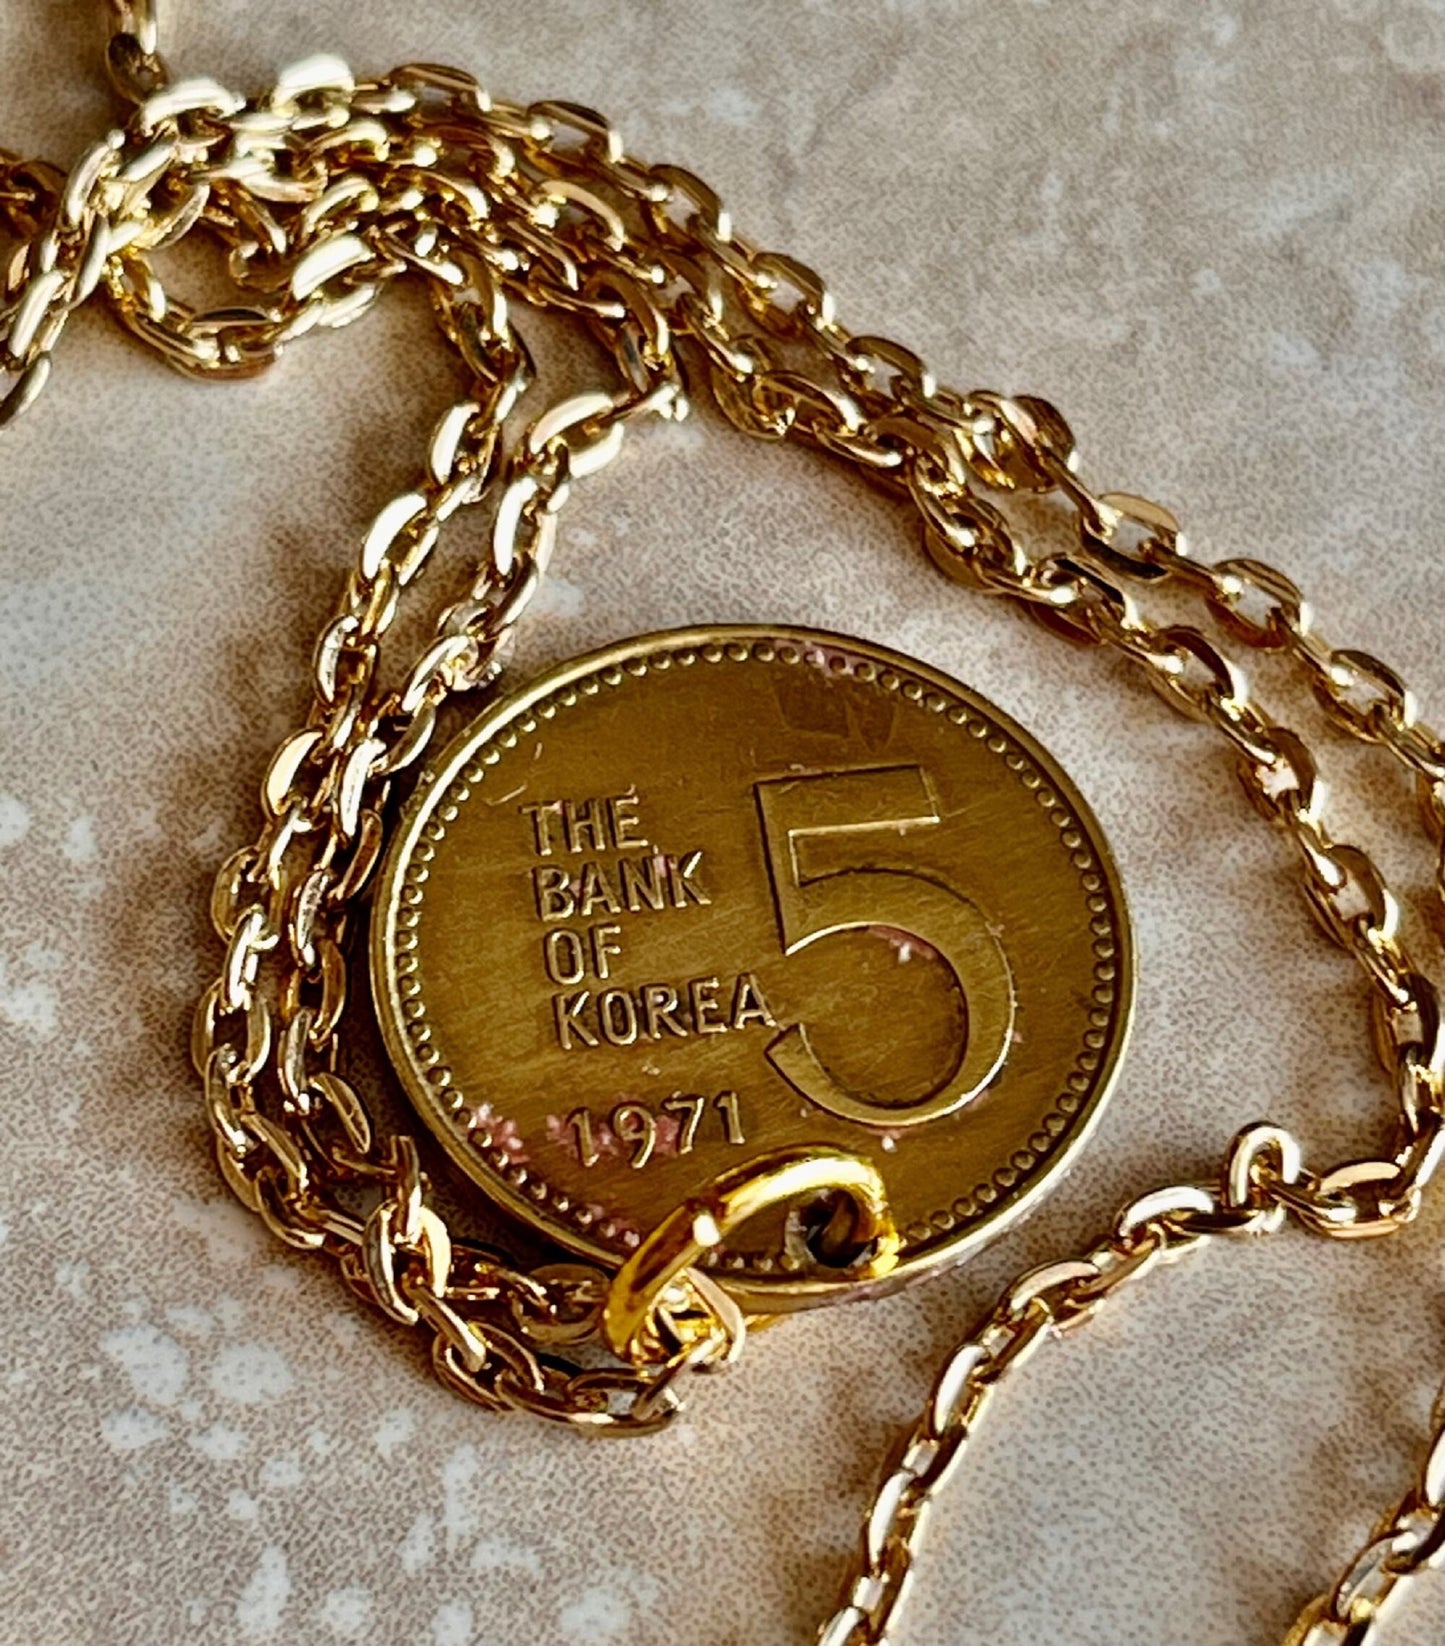 South Korea Coin Necklace Korean 5 Won Personal Pendant Old Vintage Handmade Jewelry Gift Friend Charm For Him Her World Coin Collector